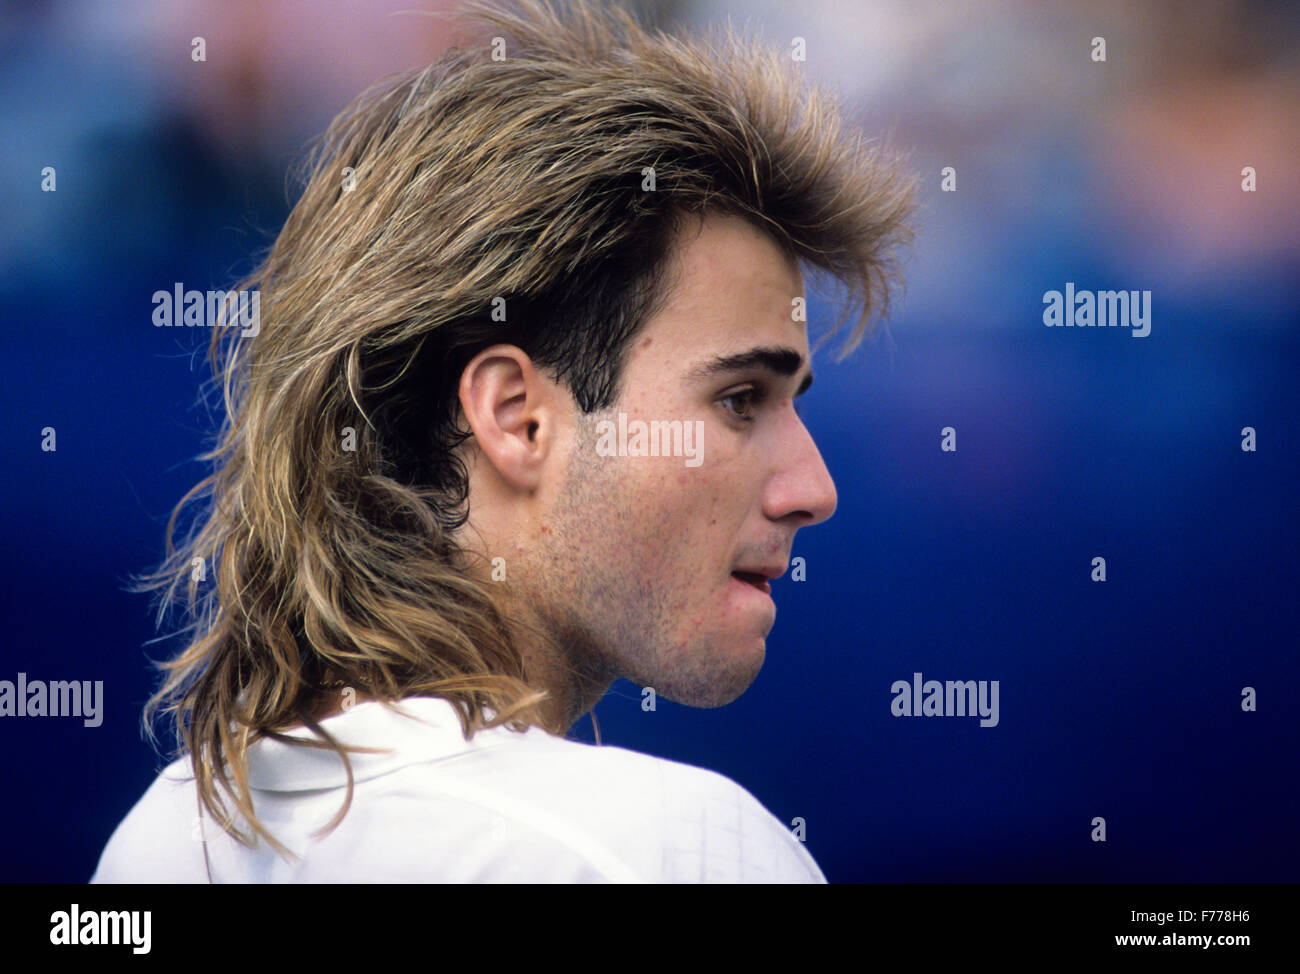 andre agassi,1988 Stock Photo